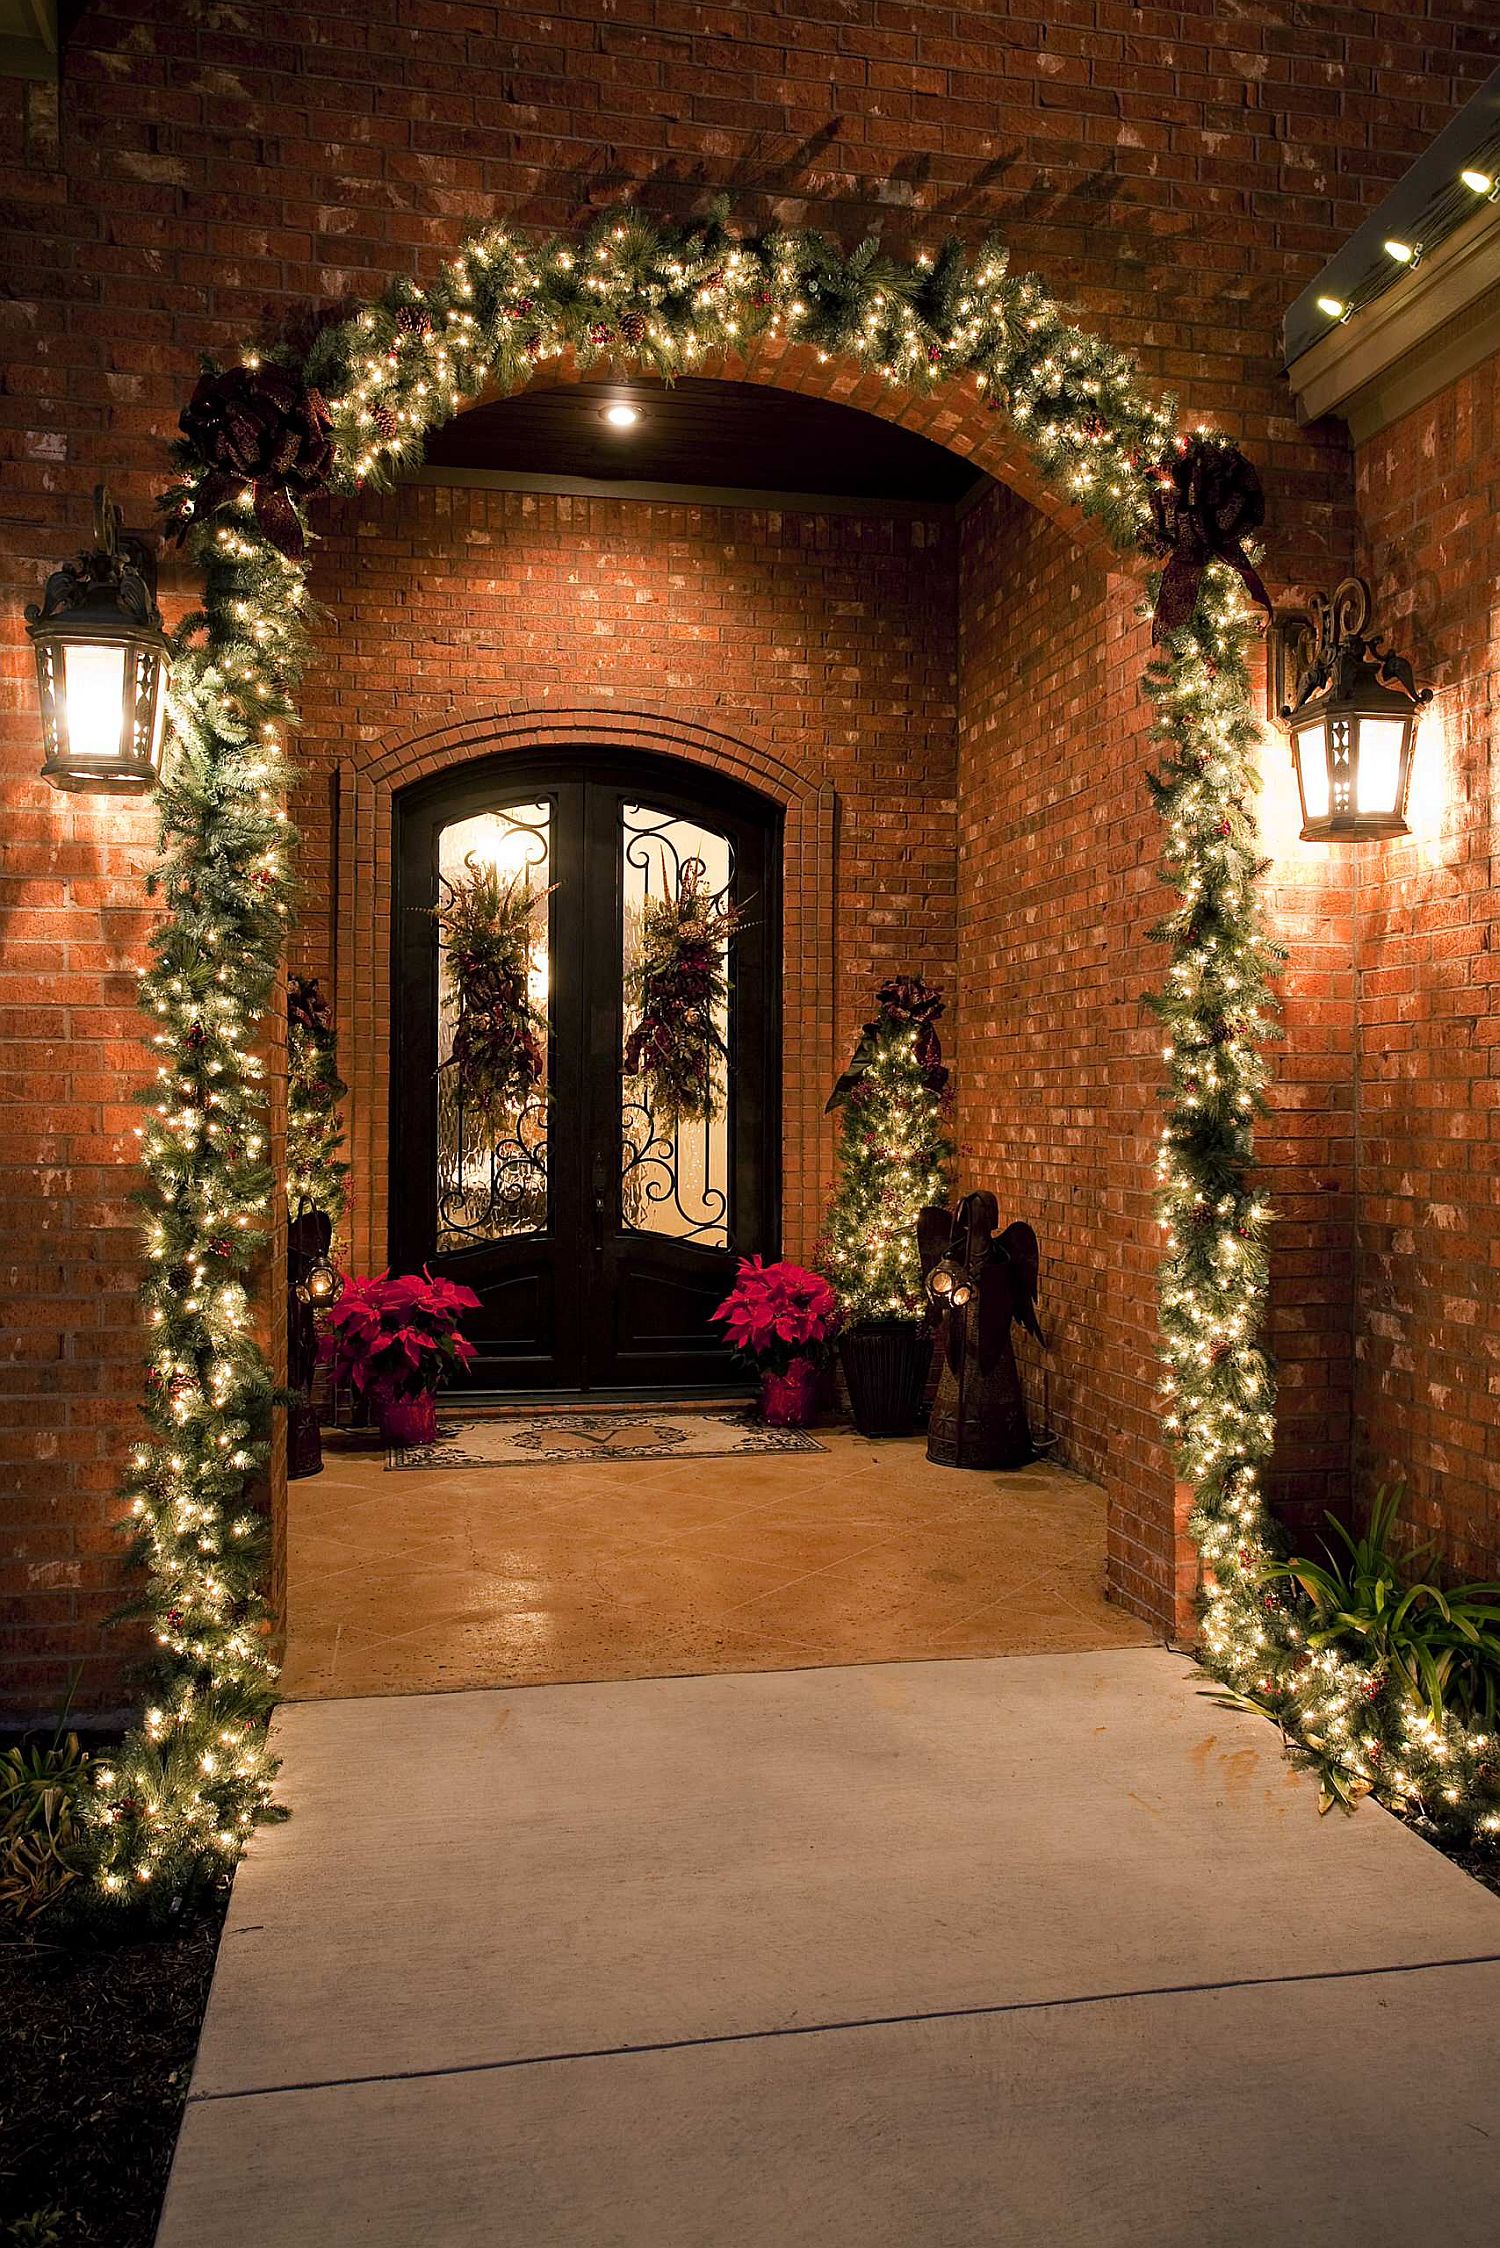 Christmas decorating and lighting ideas for the traditional porch